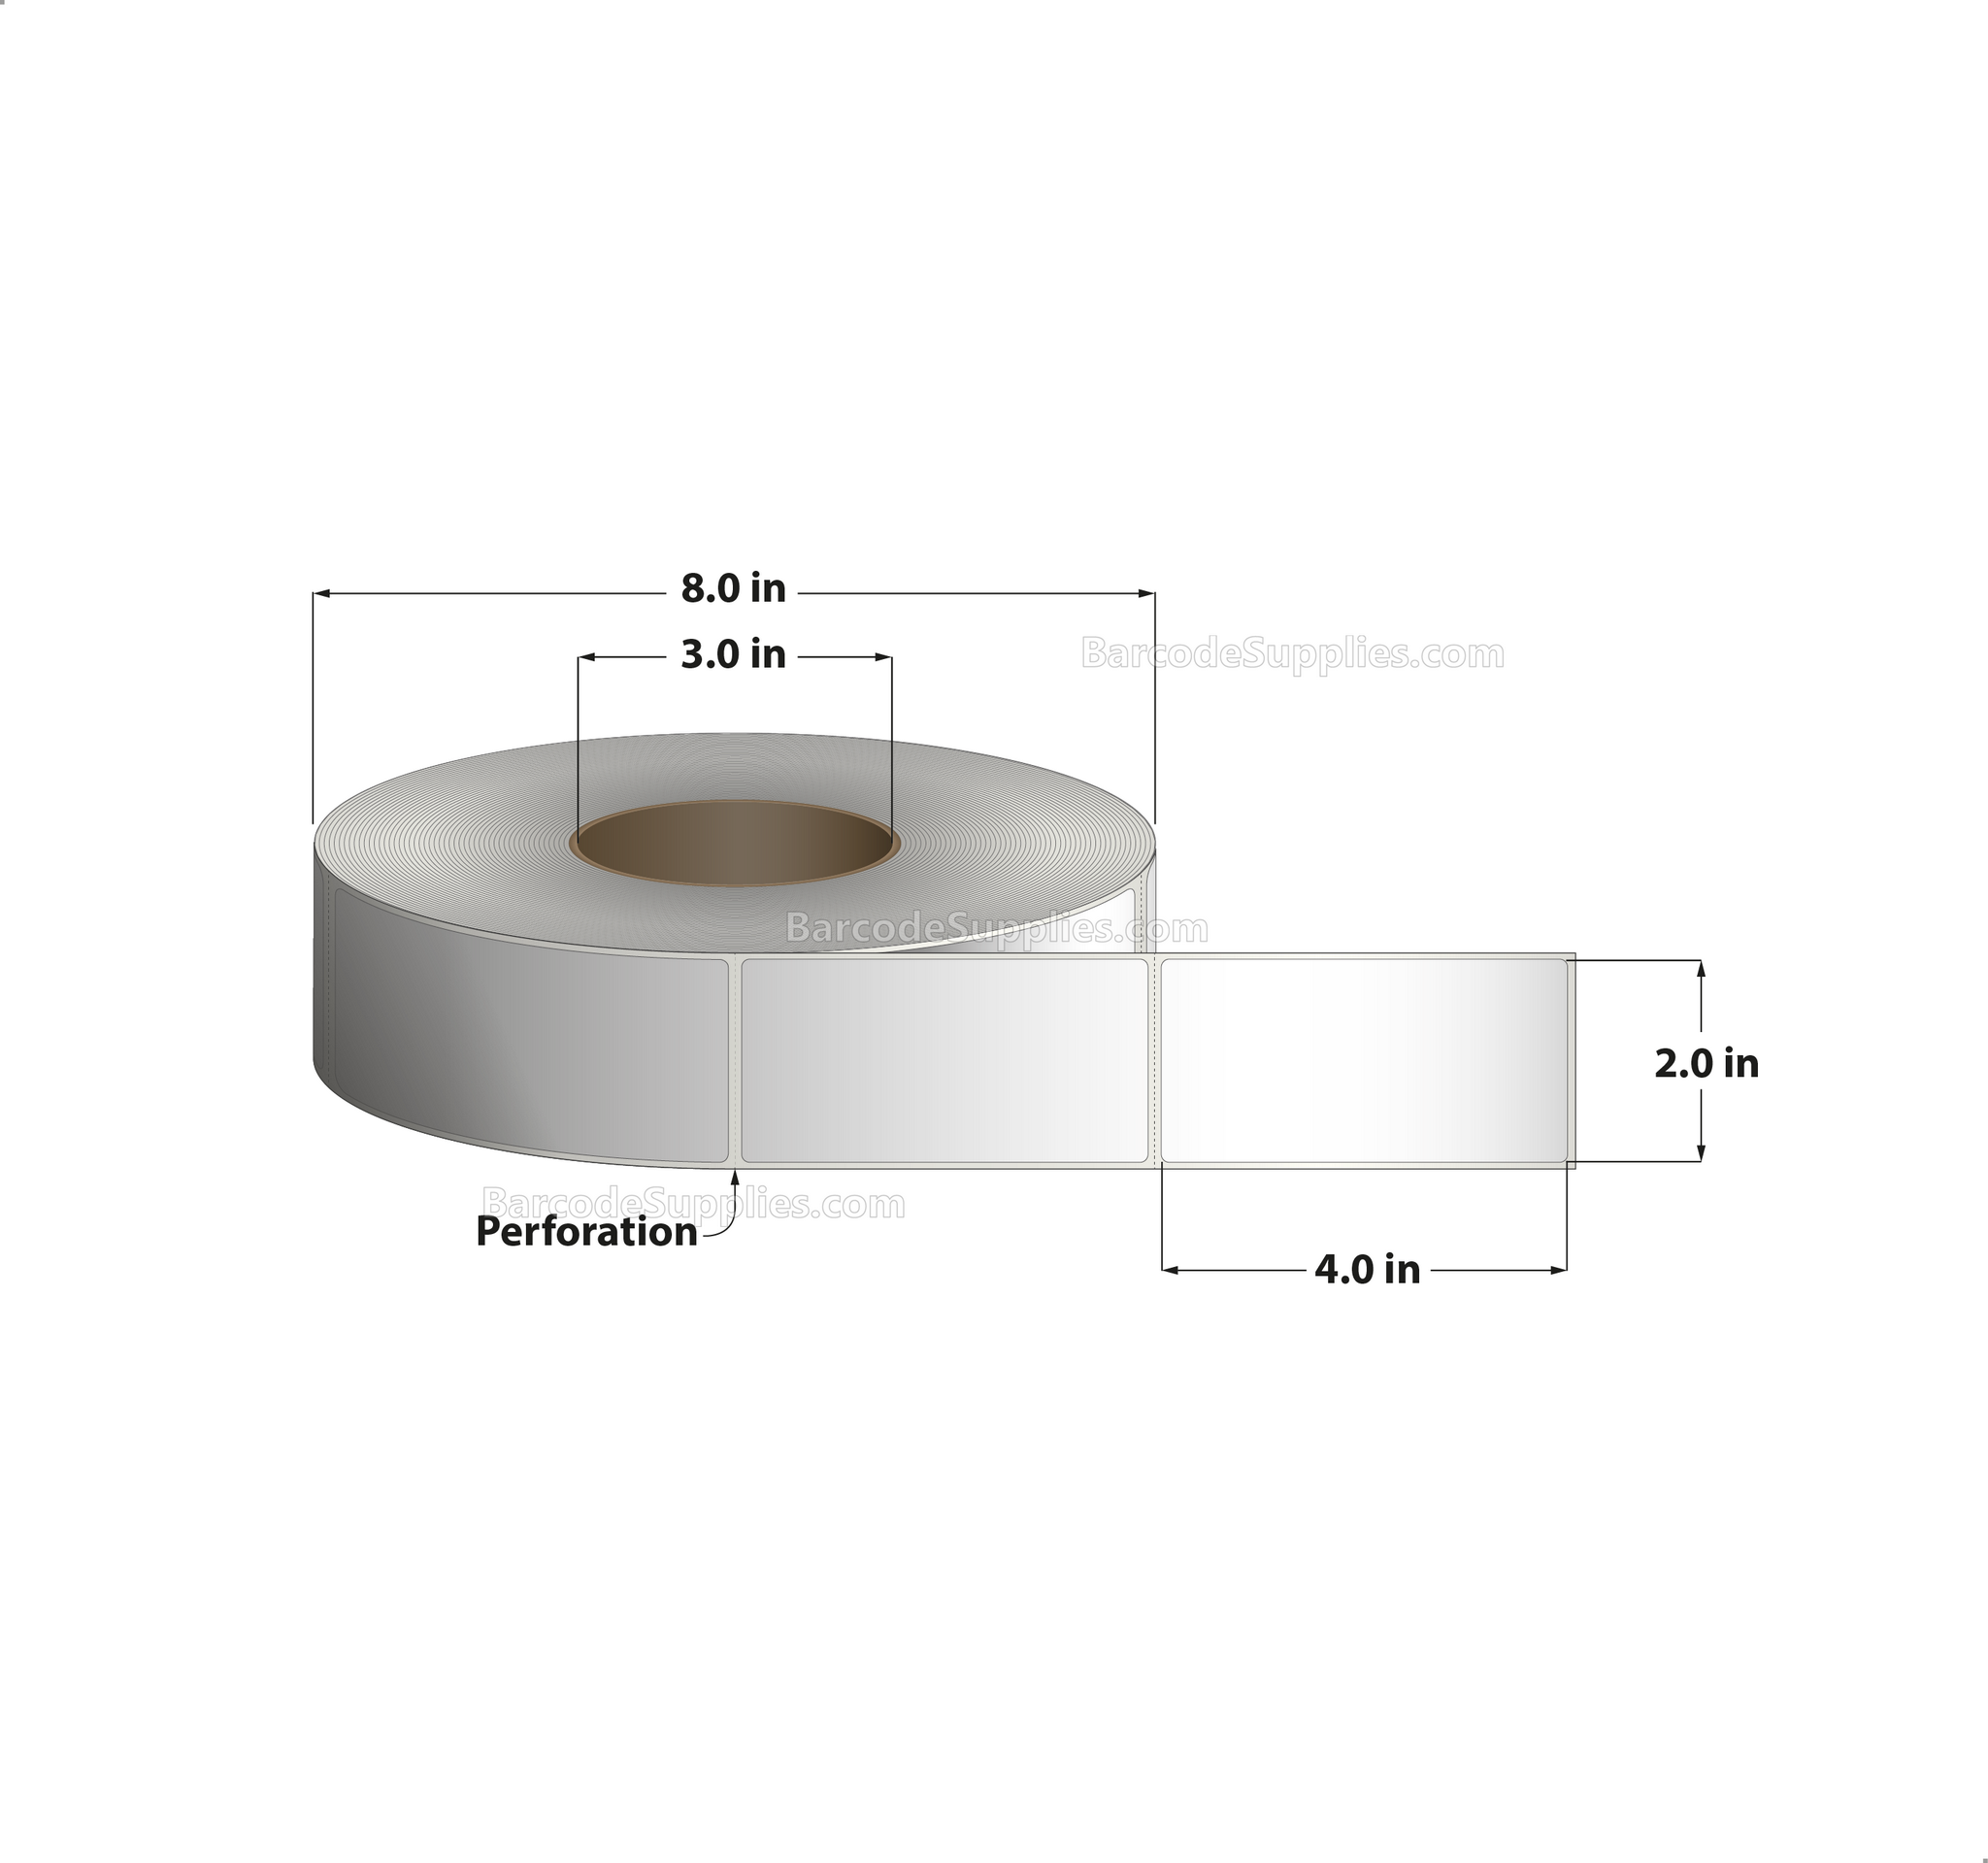 2 x 4 Thermal Transfer White Labels With Permanent Adhesive - Perforated - 1500 Labels Per Roll - Carton Of 8 Rolls - 12000 Labels Total - MPN: RT-2-4-1500-3